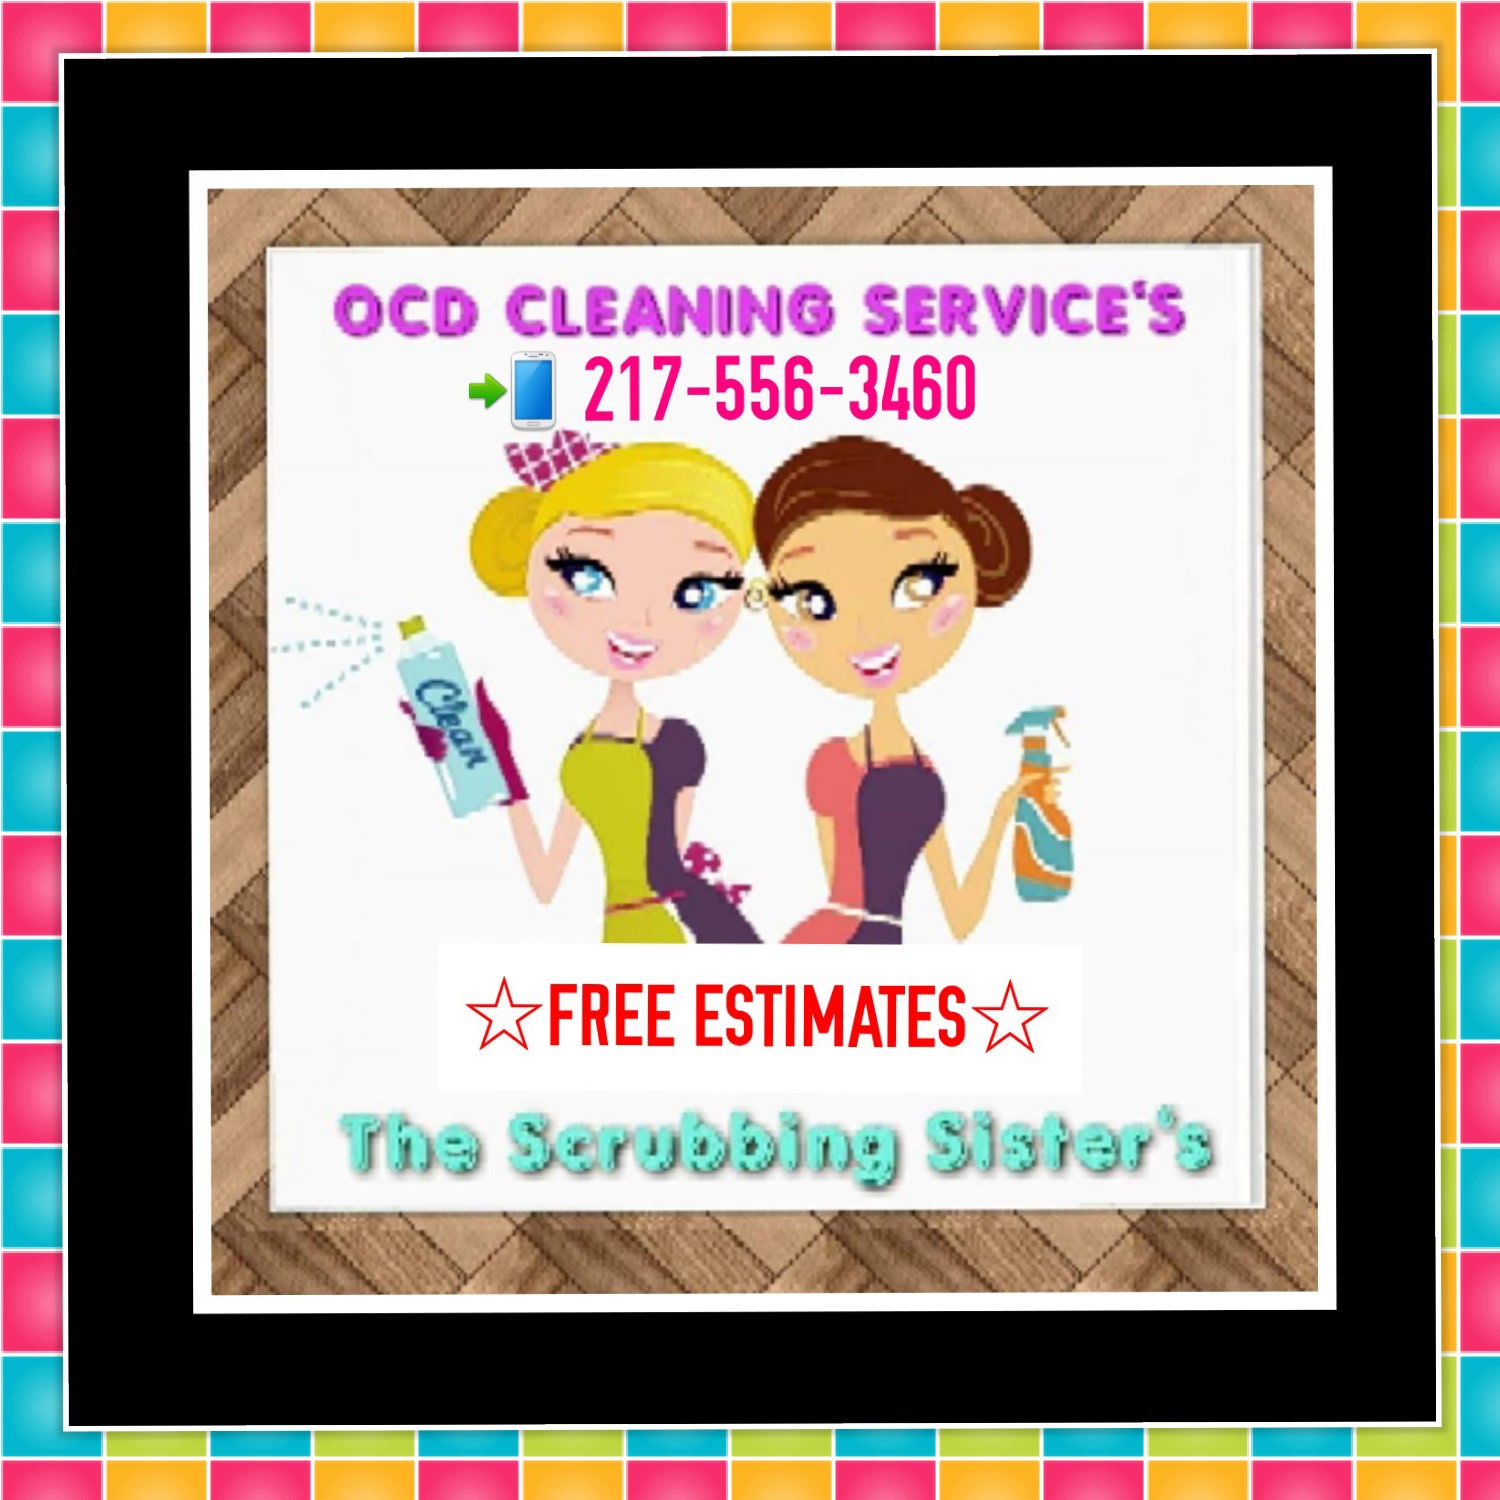 Ocd Cleaning Service's